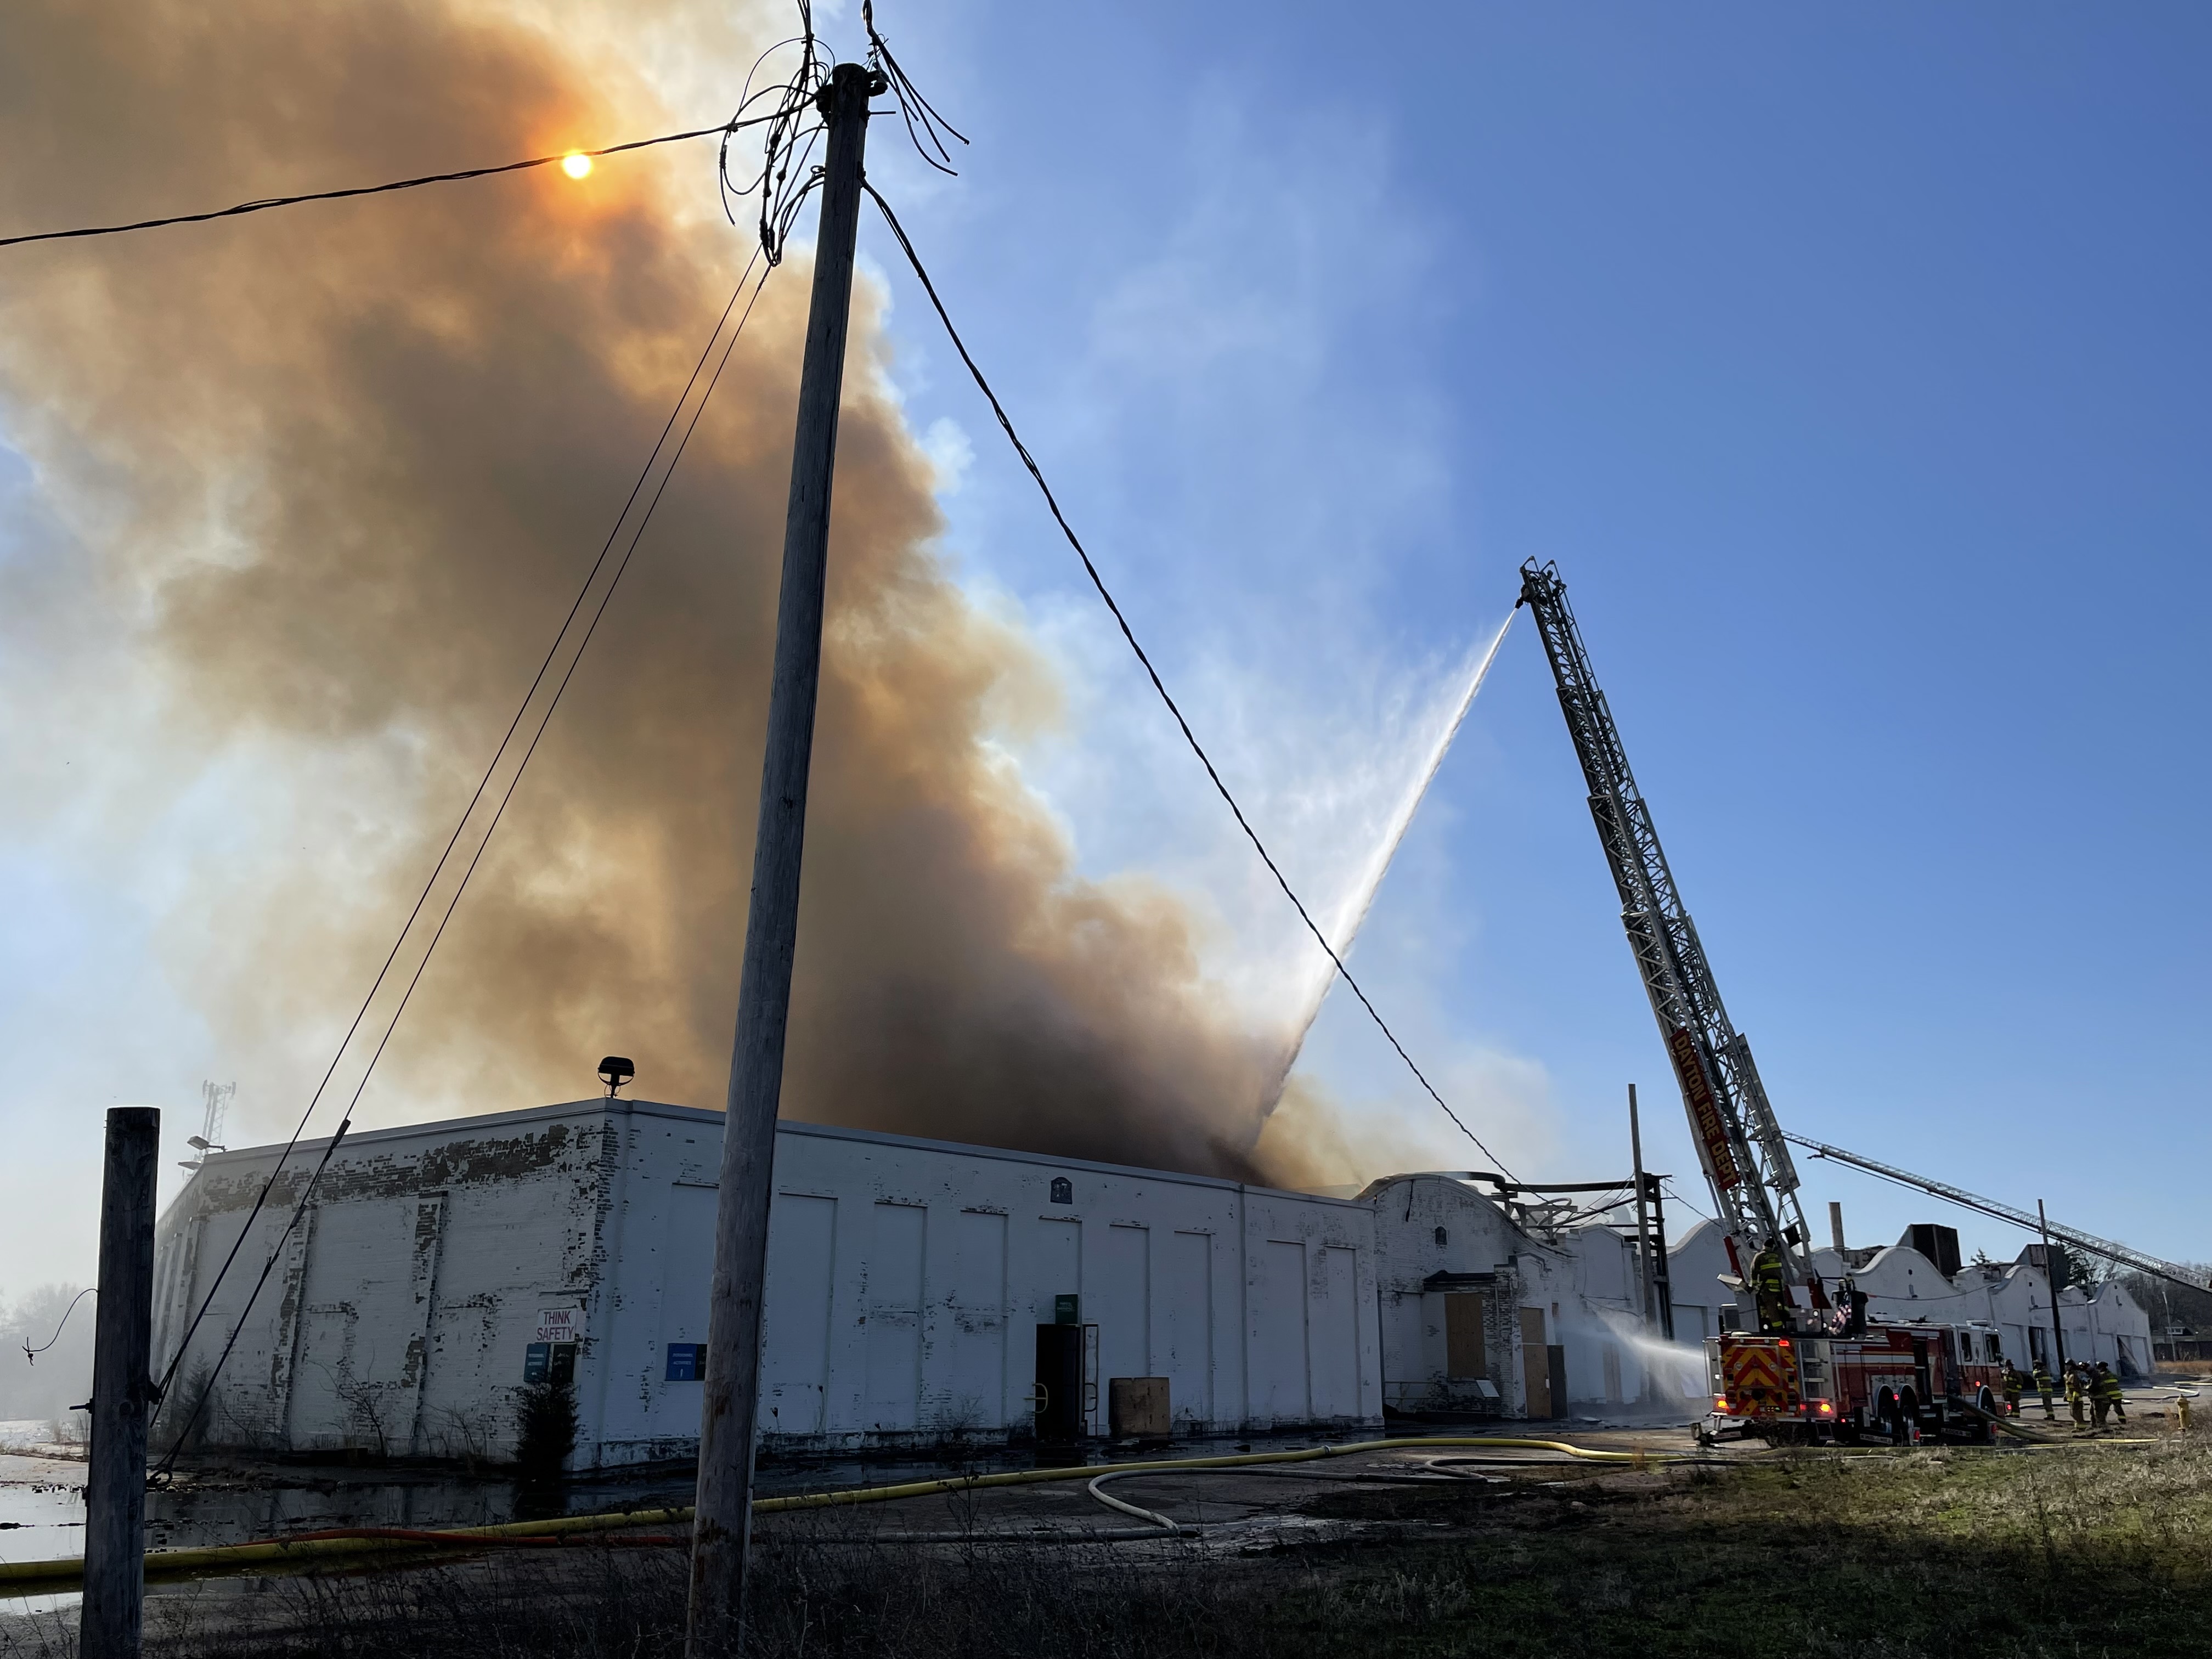 A white brick building is on fire with smoke rising and blocking the sun's rays as a fire crew works at a truck to launch water into the building from a ladder extended into the air.